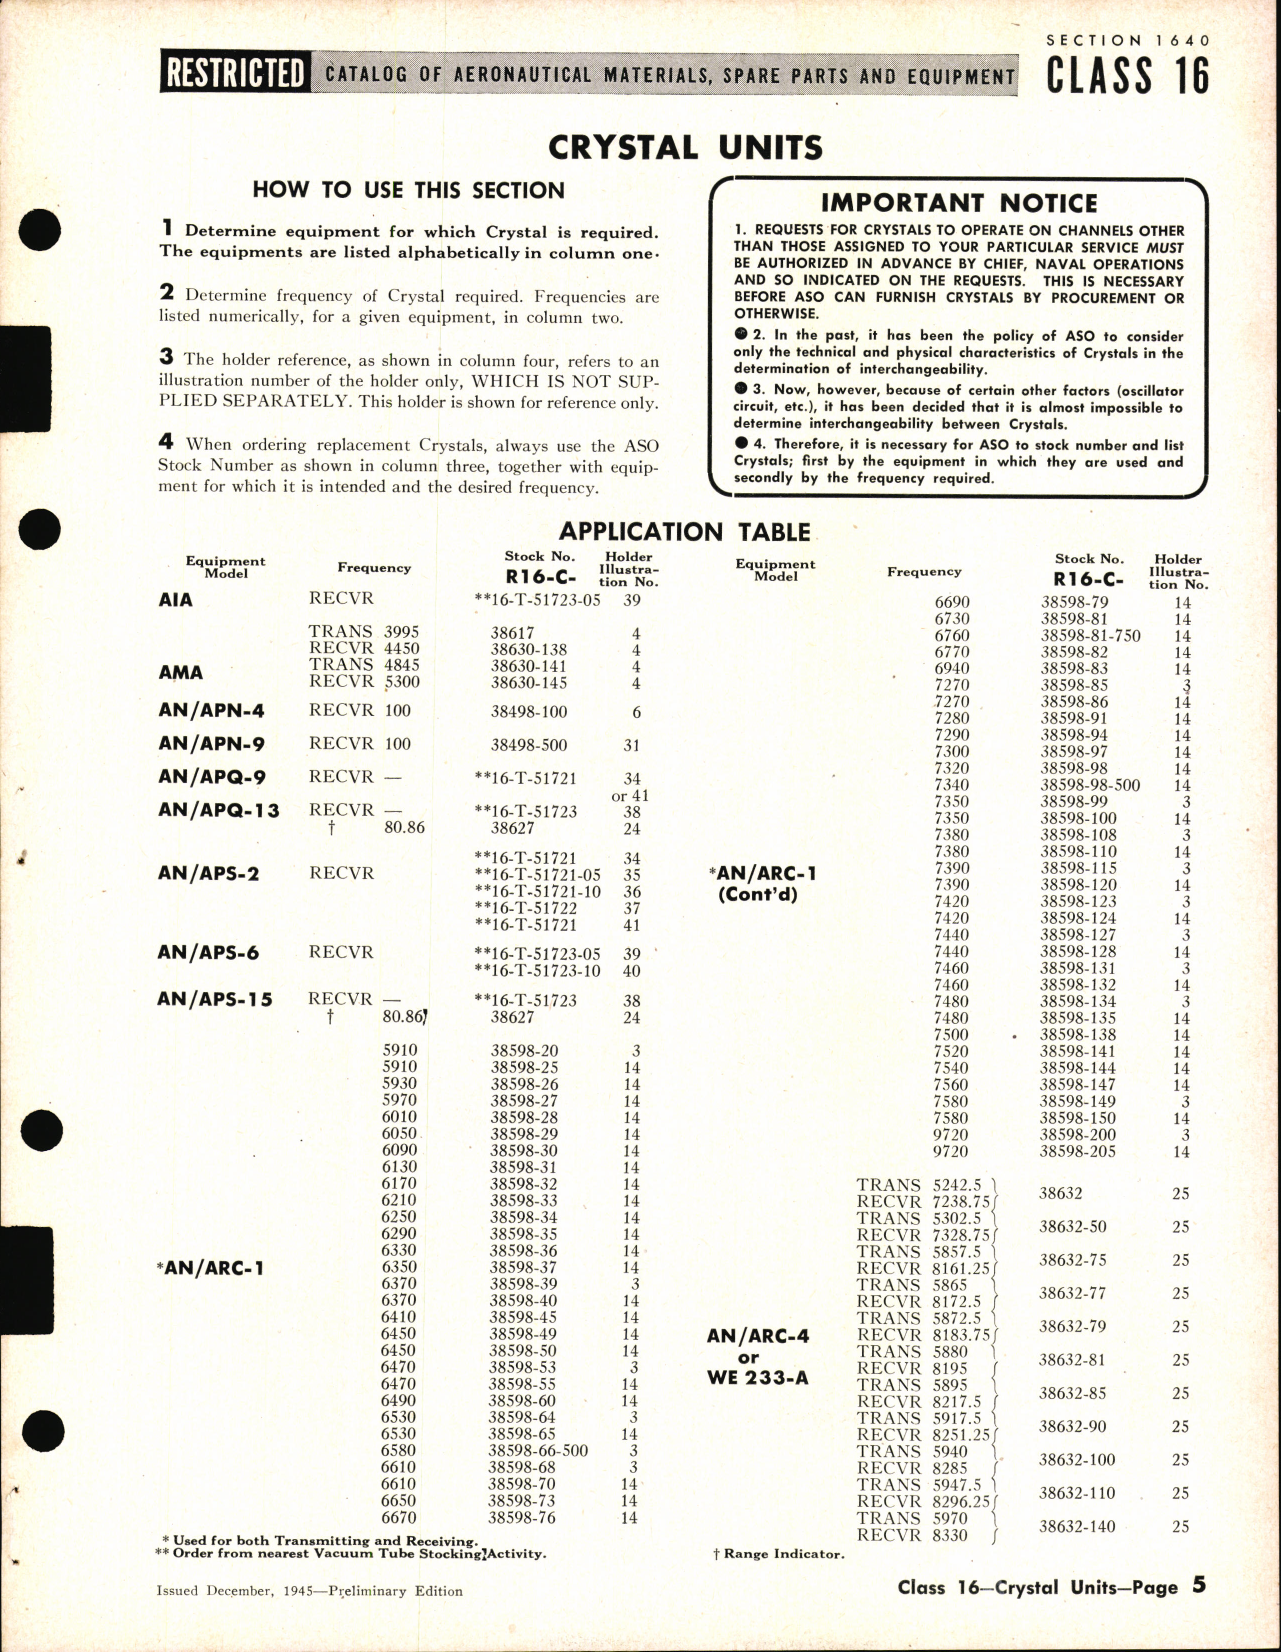 Sample page 5 from AirCorps Library document: Crystal Units